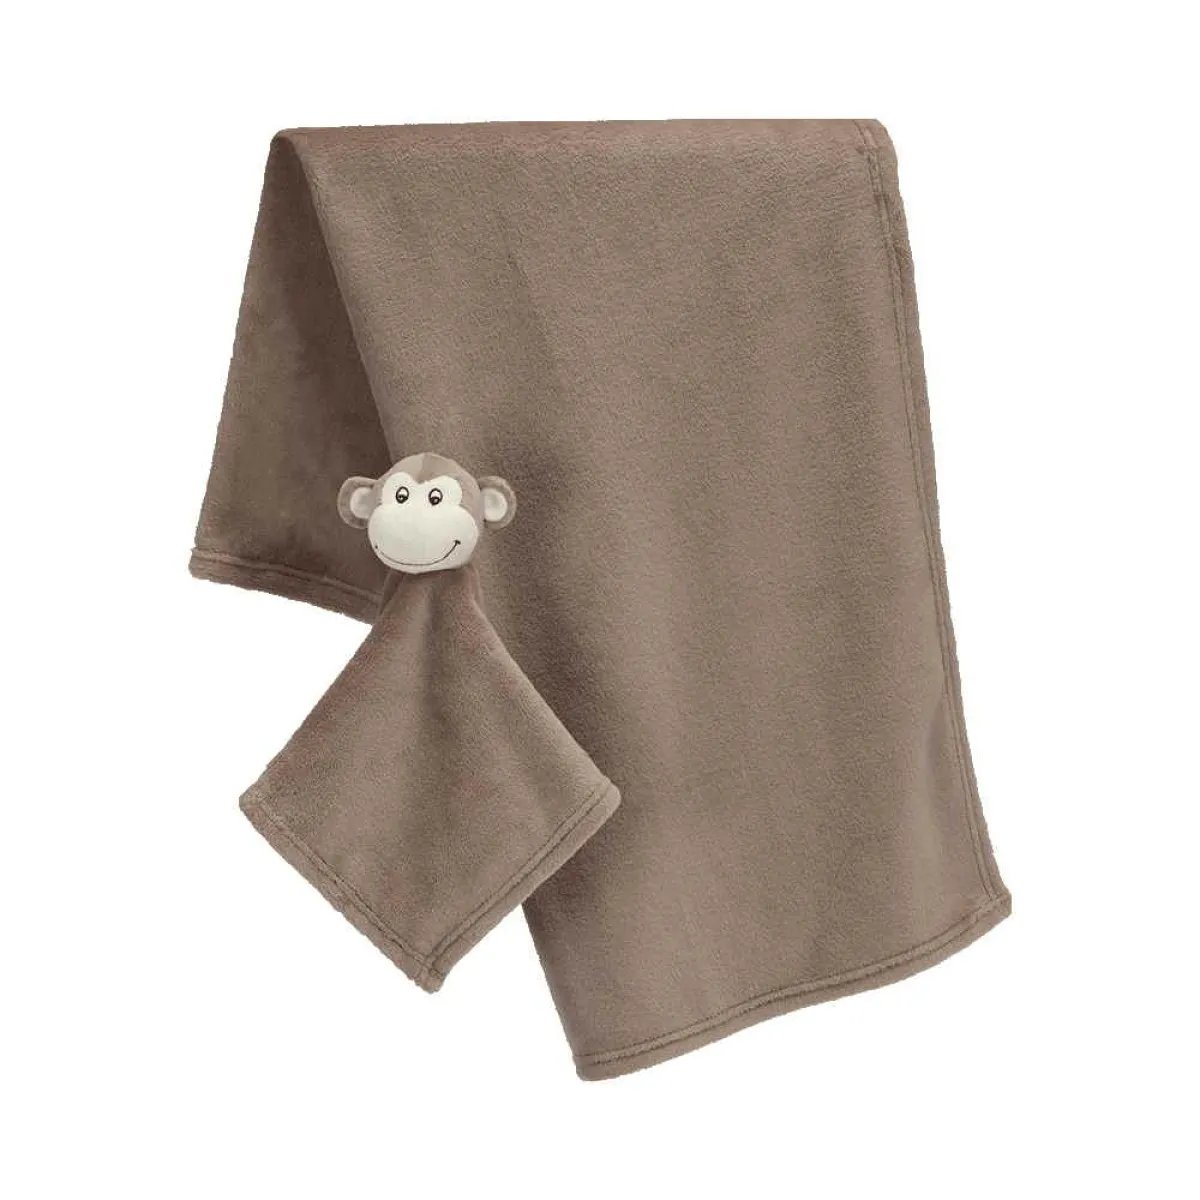 Baby blanket in light brown with monkey cuddly towel